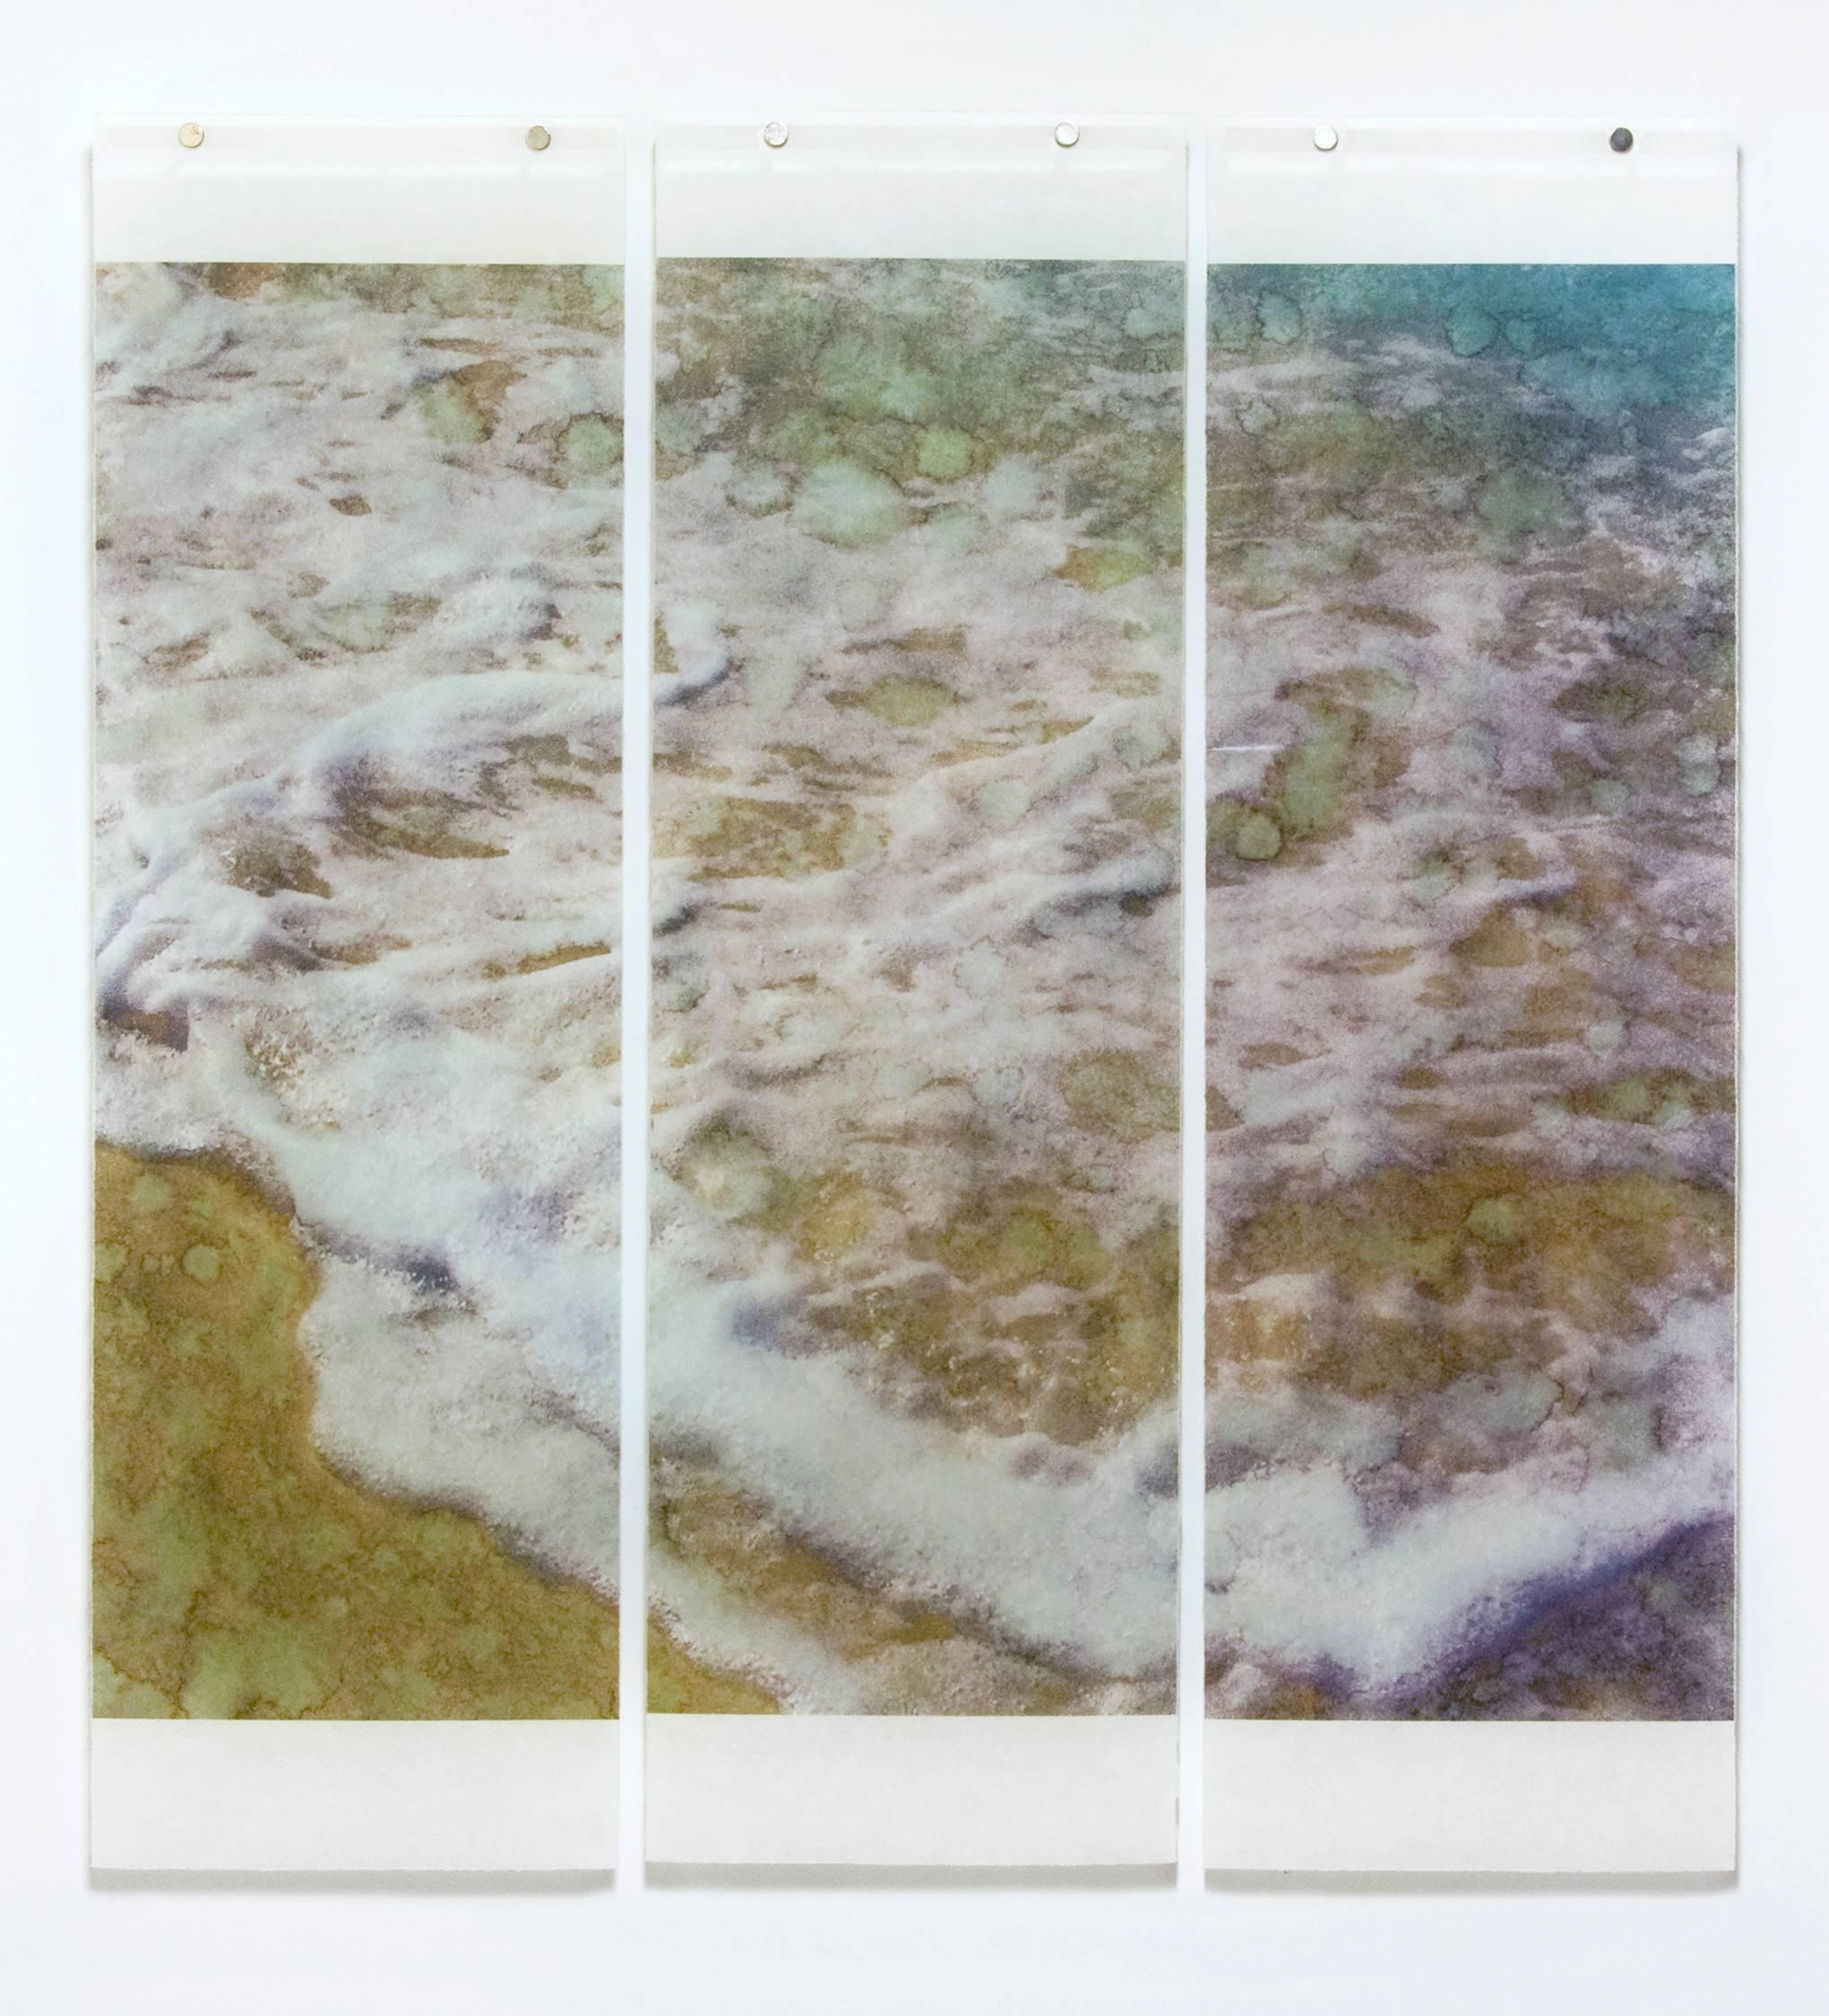 Contemporary pigment print of blue ocean waves in white frame
36 x 33 inches unframed
Japanese Kozo paper infused with encaustic on 3 panels, each panel is 36 inches x 11 inches 

Jeri Eisenberg's photographs, which capture nature's beautiful